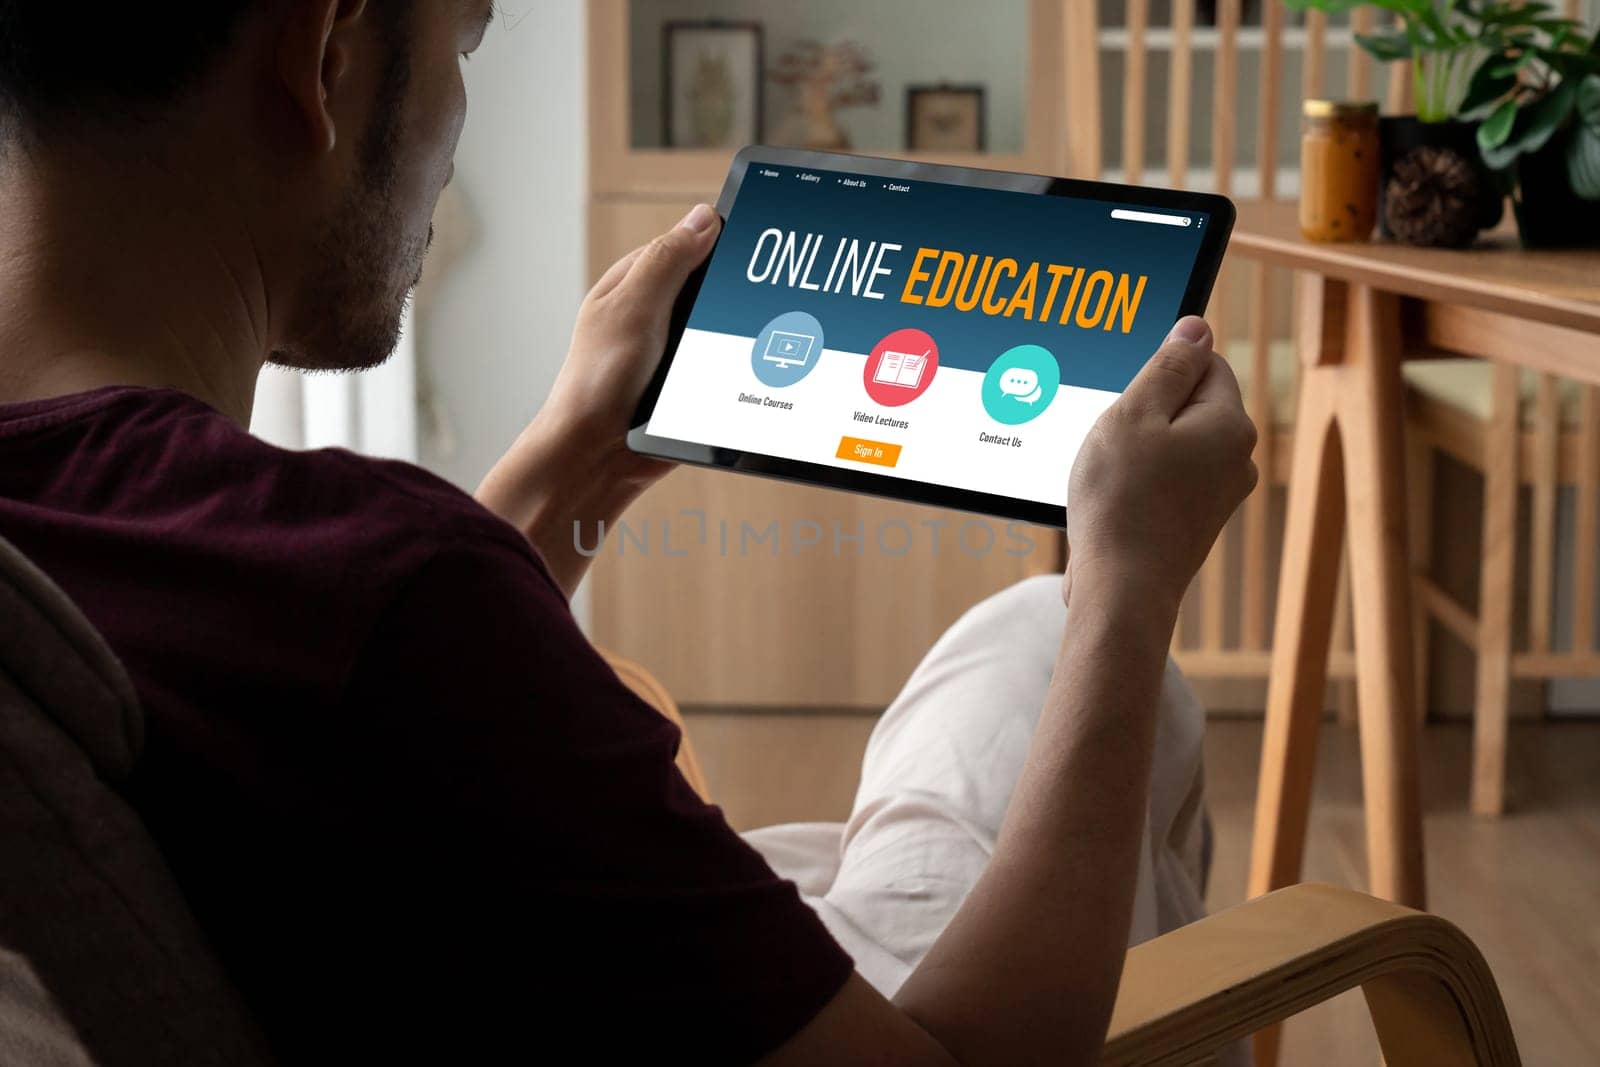 E-learning website with modish sofware for student to study on the internet by biancoblue